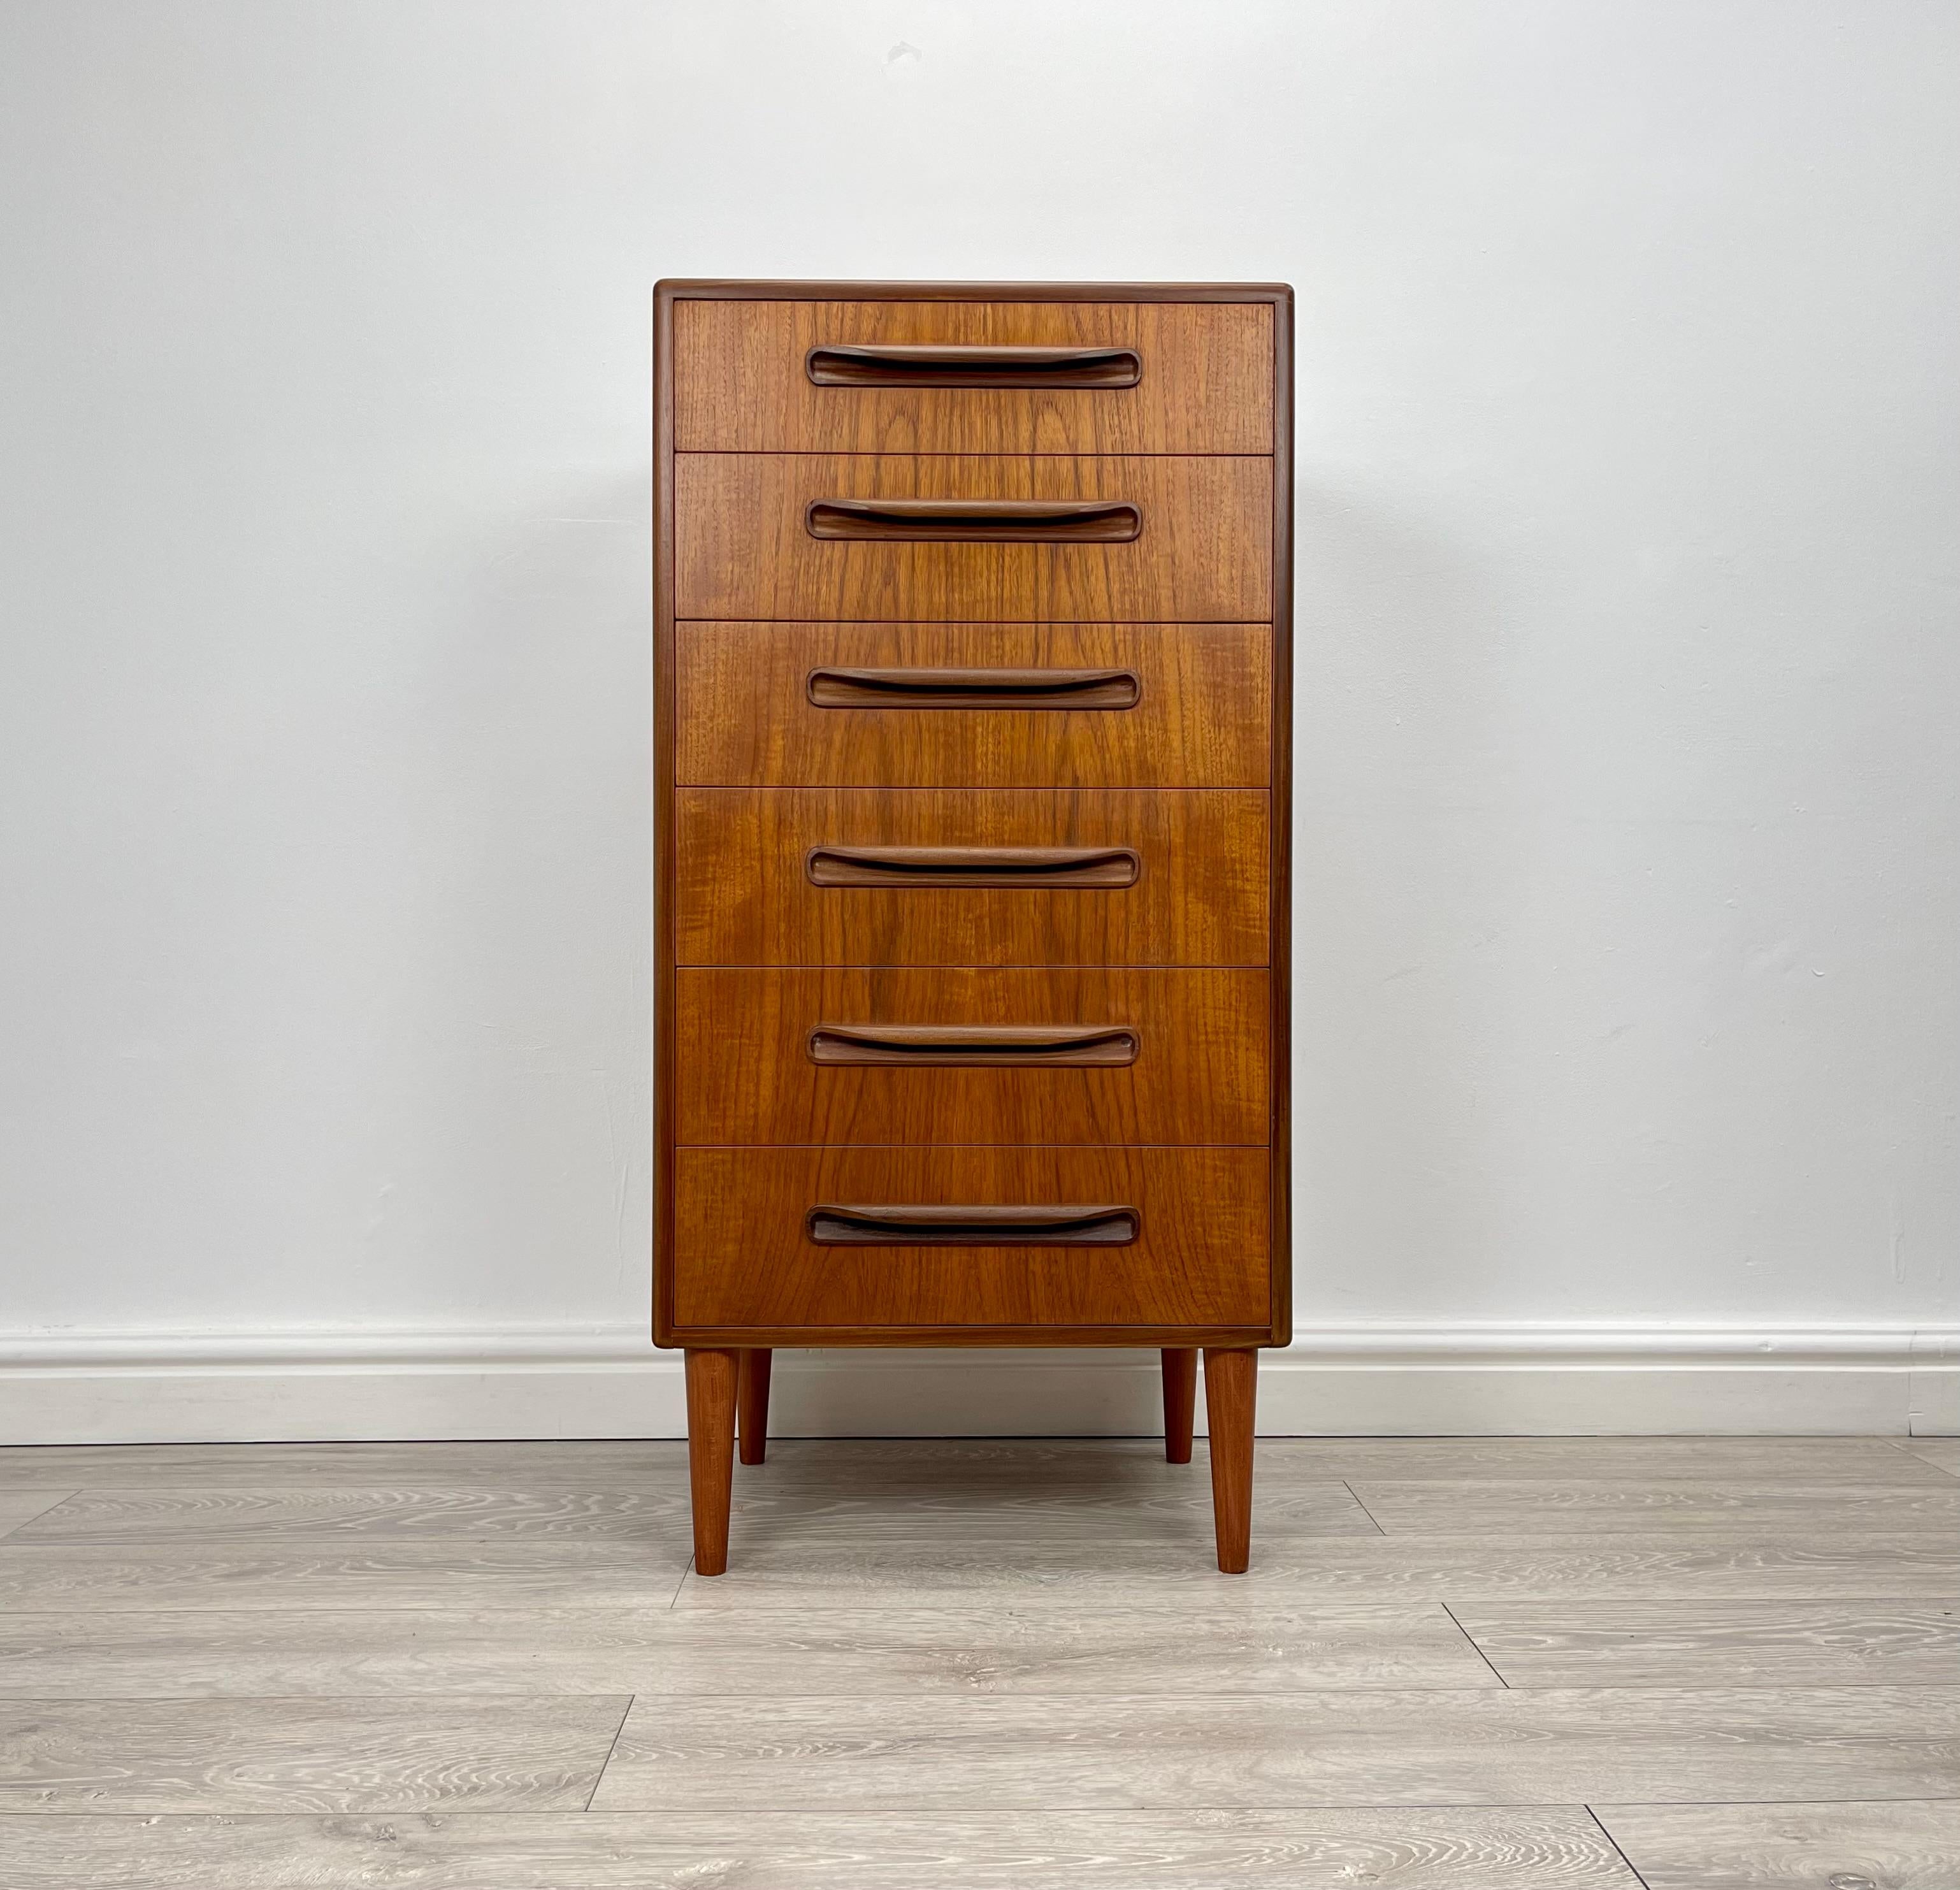 CHEST OF DRAWERS 
Midcentury teak tallboy chest of drawers made by G Plan fresco  range circa 1960 .

The chest of drawers has stunning grain and golden patina throughout.

There’s six good size drawers fitted with solid teak handles all drawers run